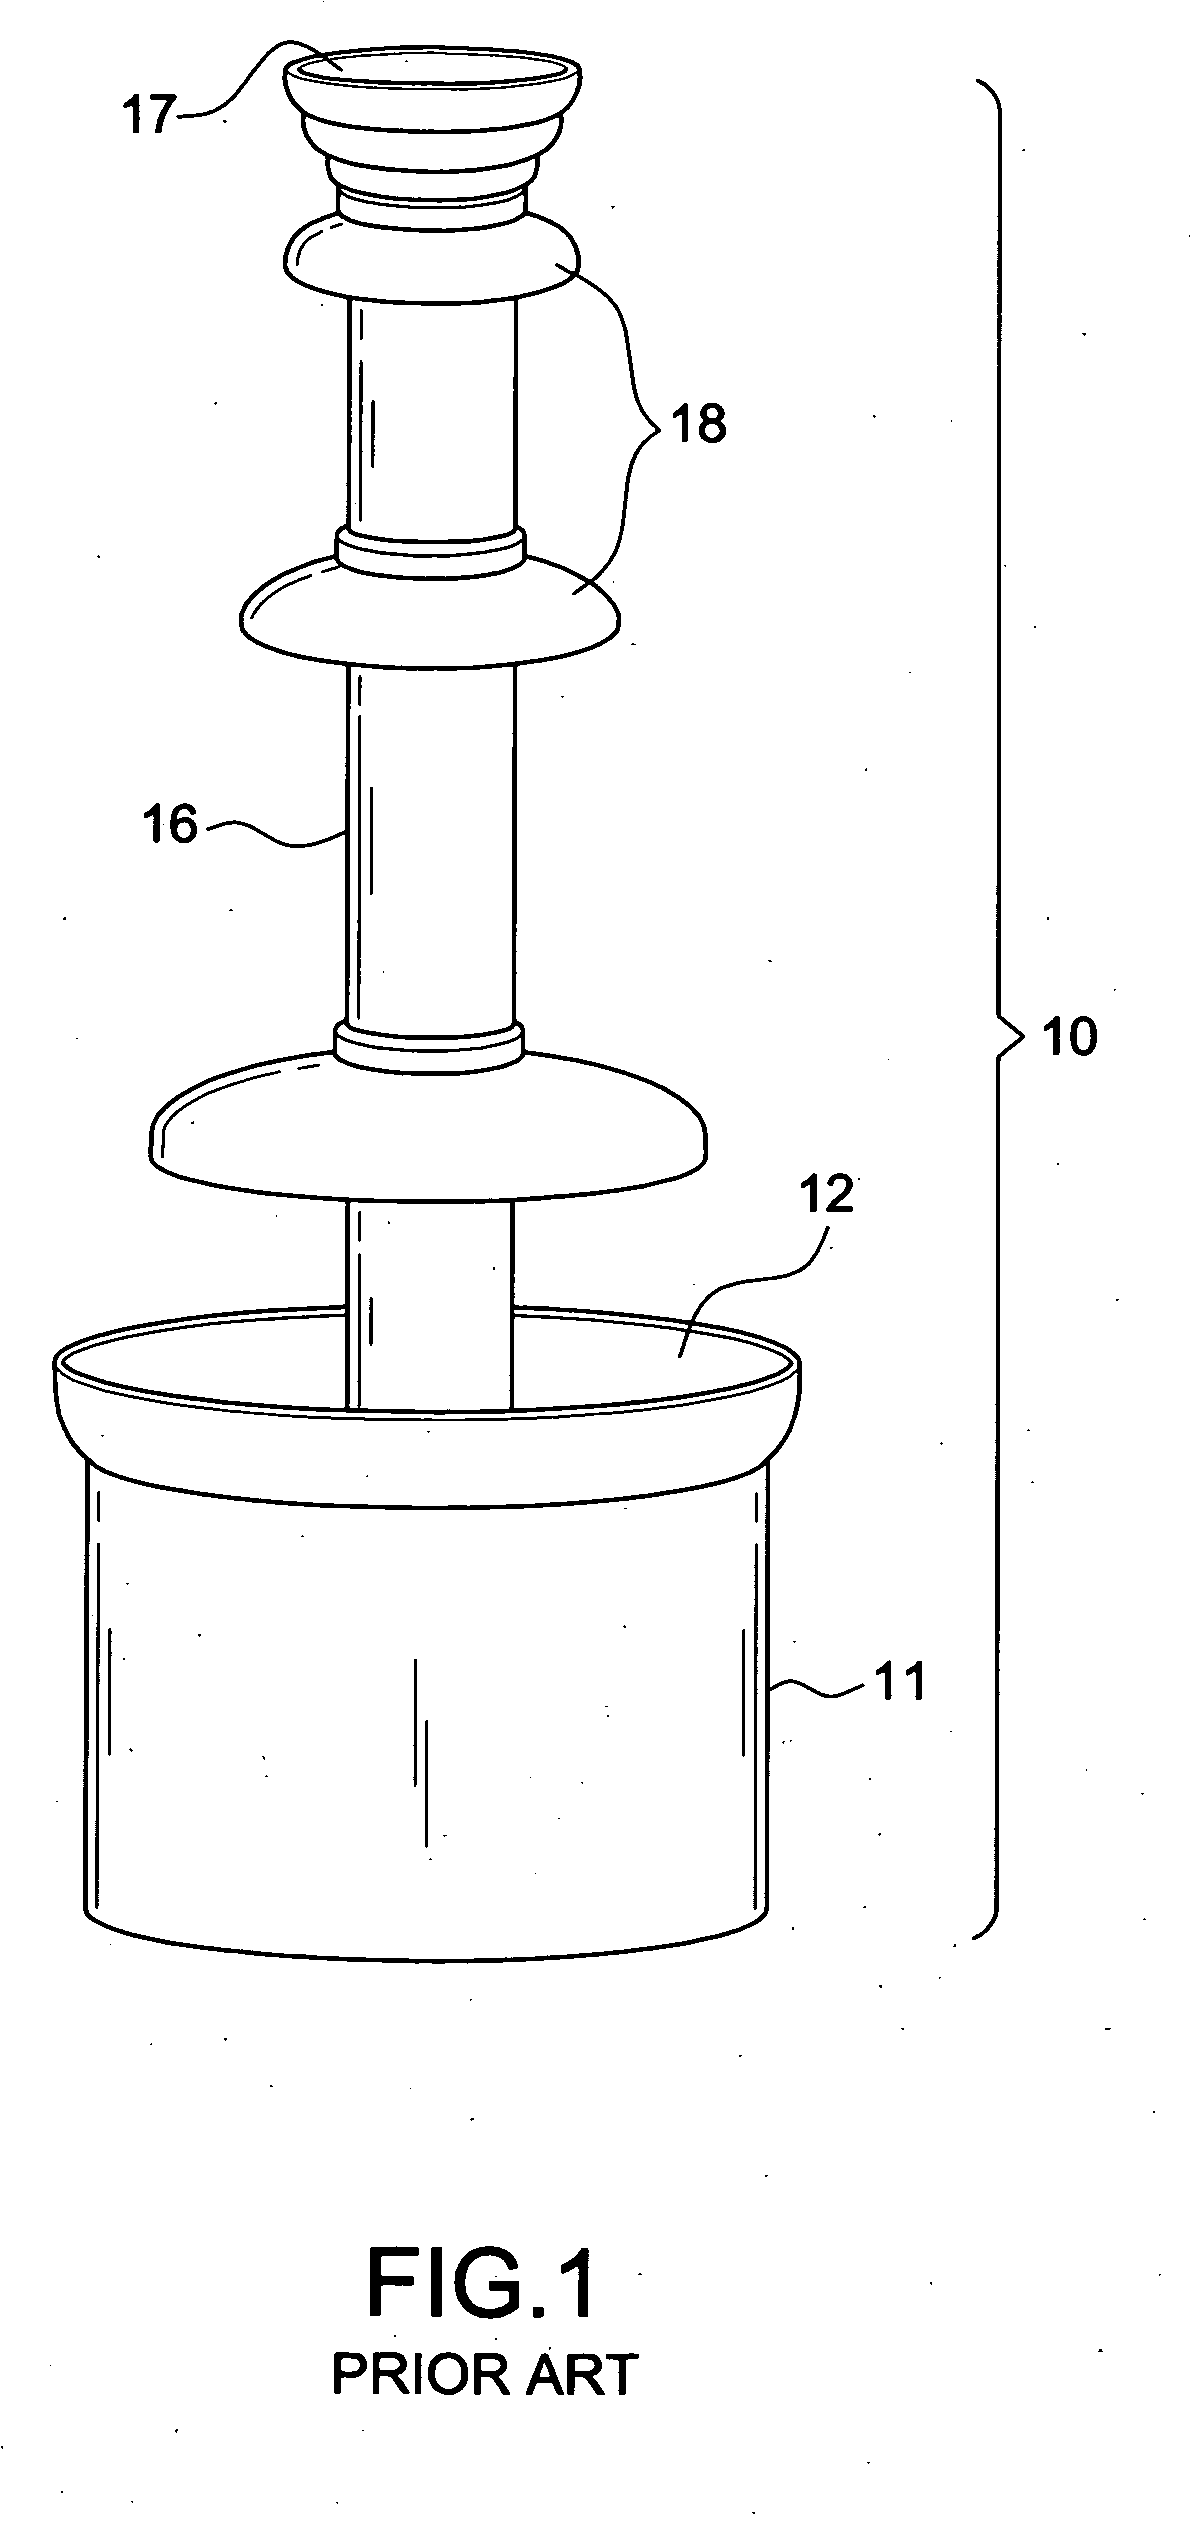 Leakproof arrangement of a chocolate fountain